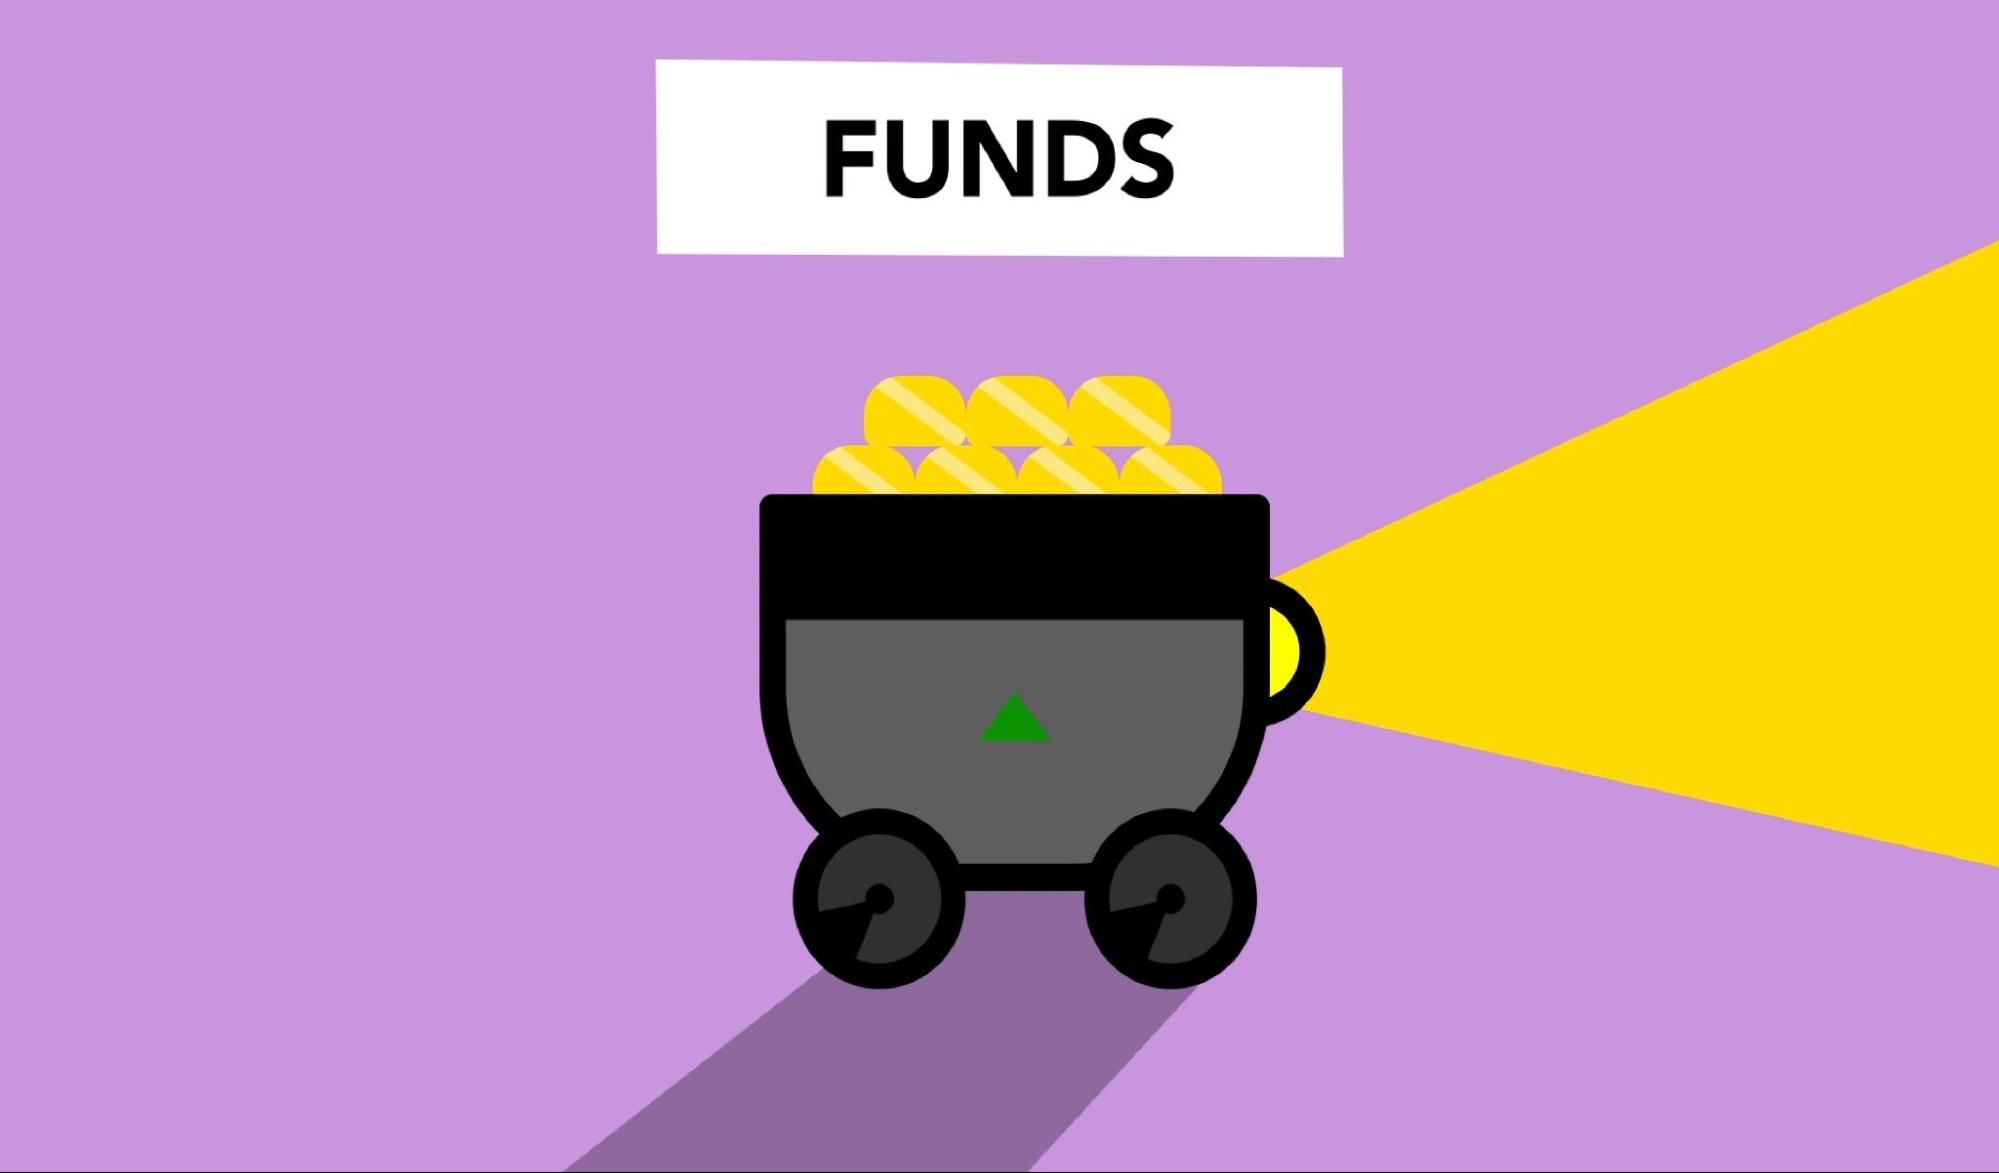 Funds options